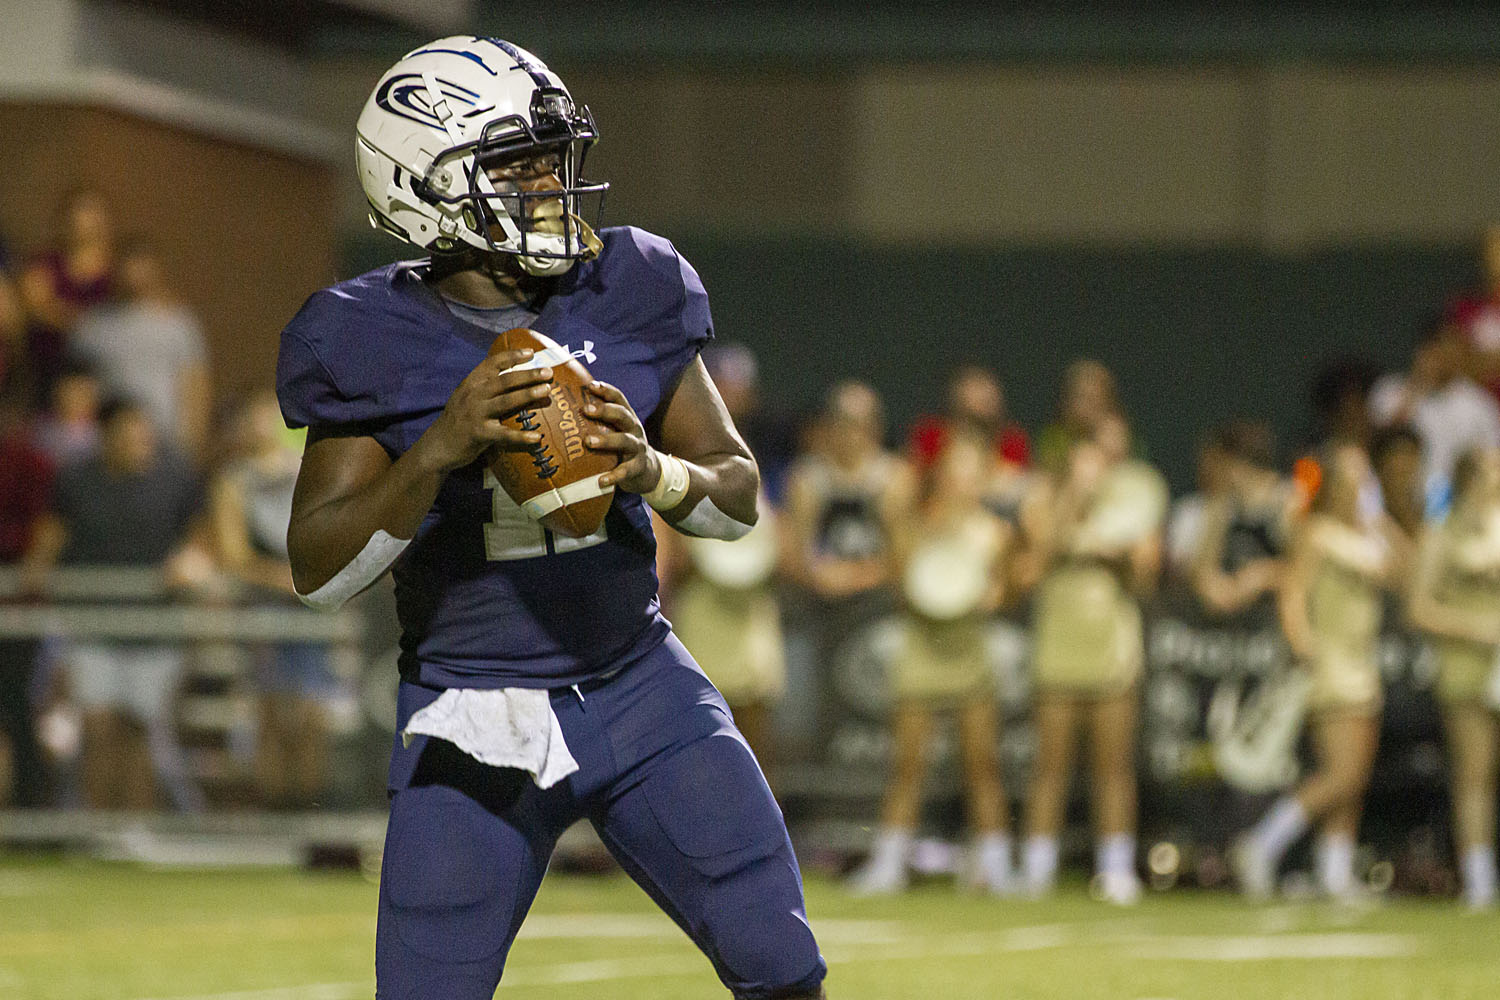 Clay-Chalkville returns home to host Athens with trip to quarterfinals on the line